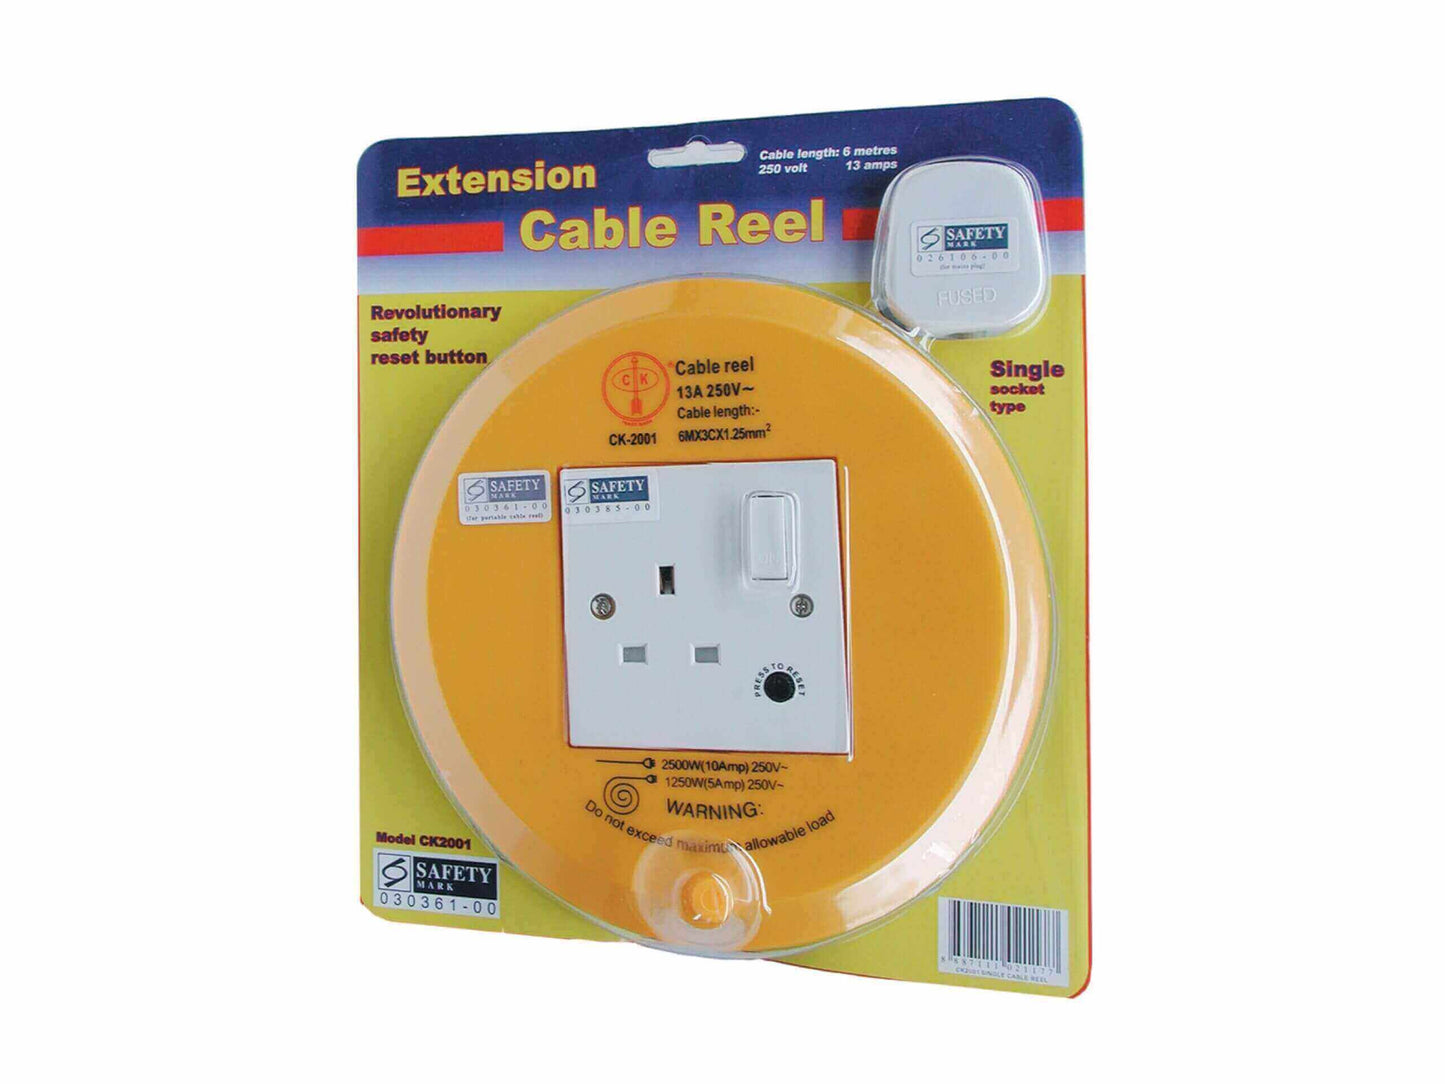 CK 200 Series Extension Cable Reel